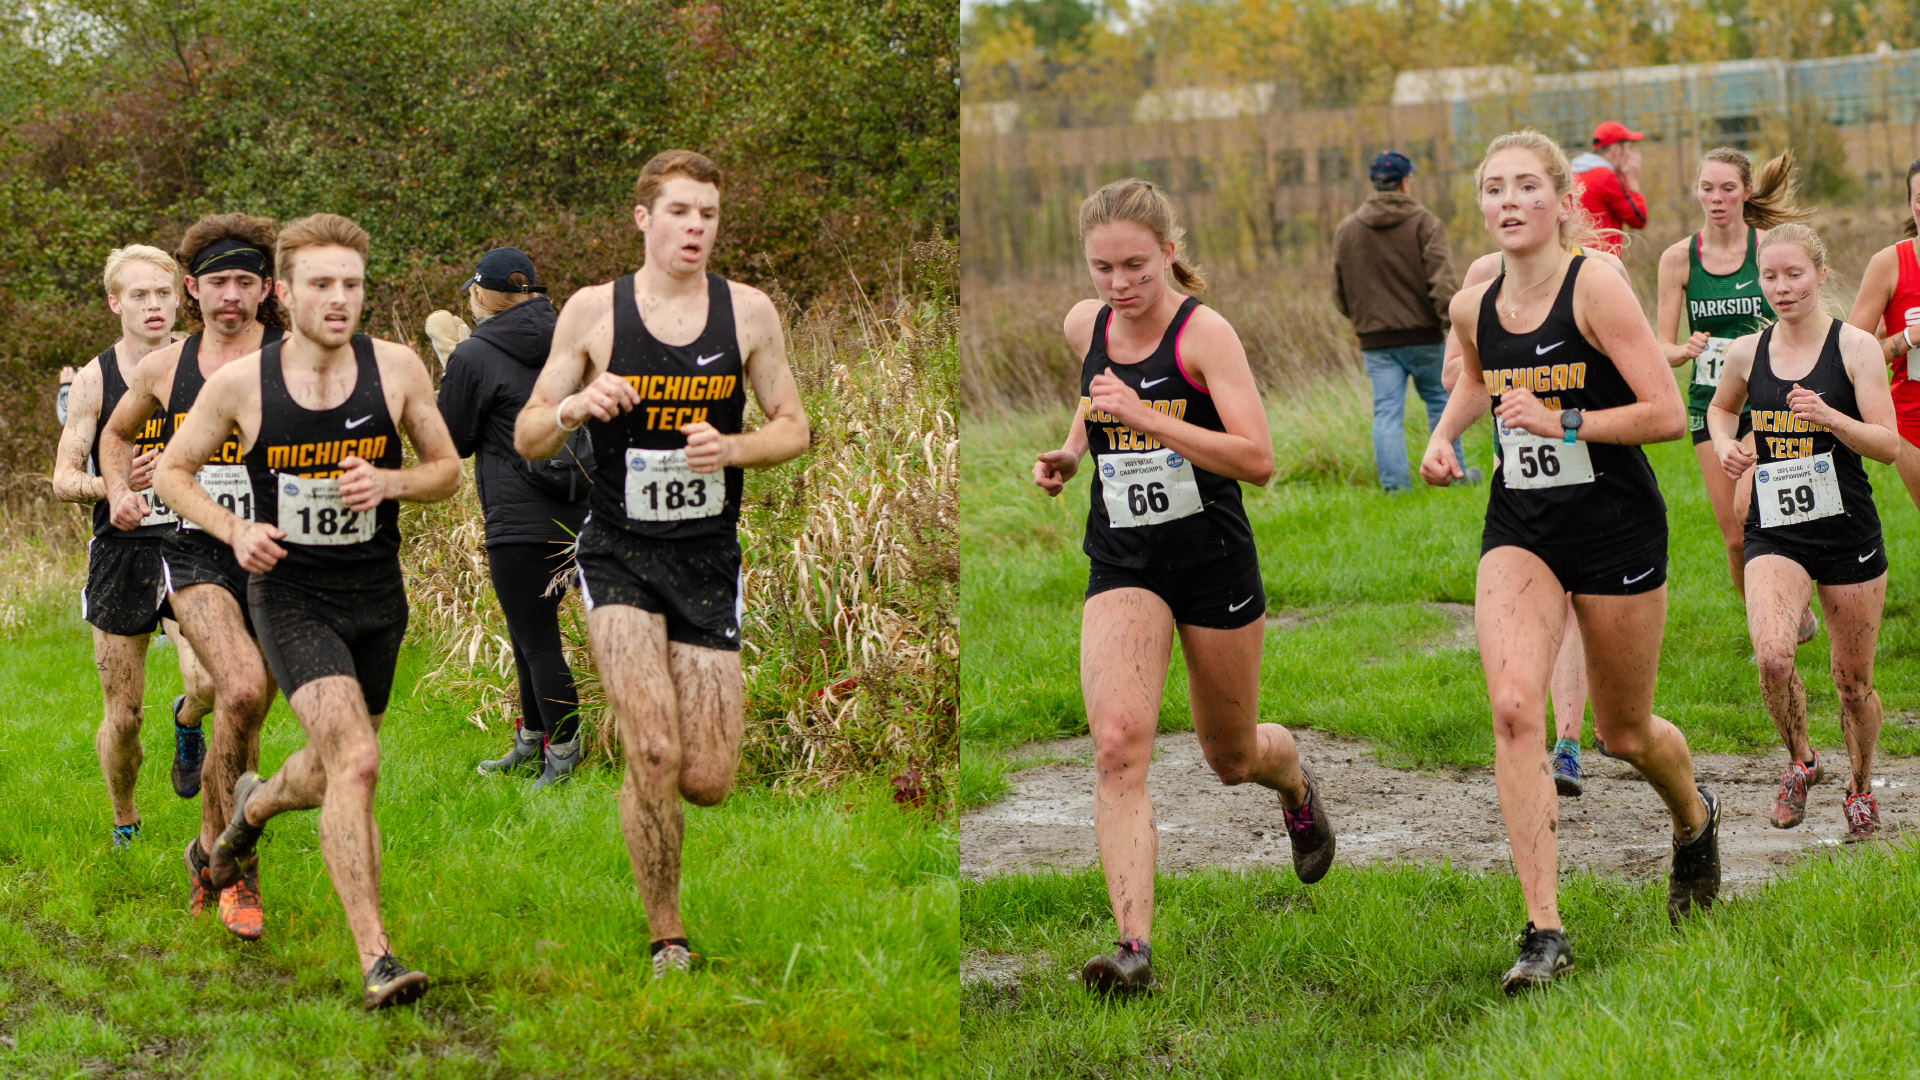 PREVIEW: Division II Midwest Cross Country Regional